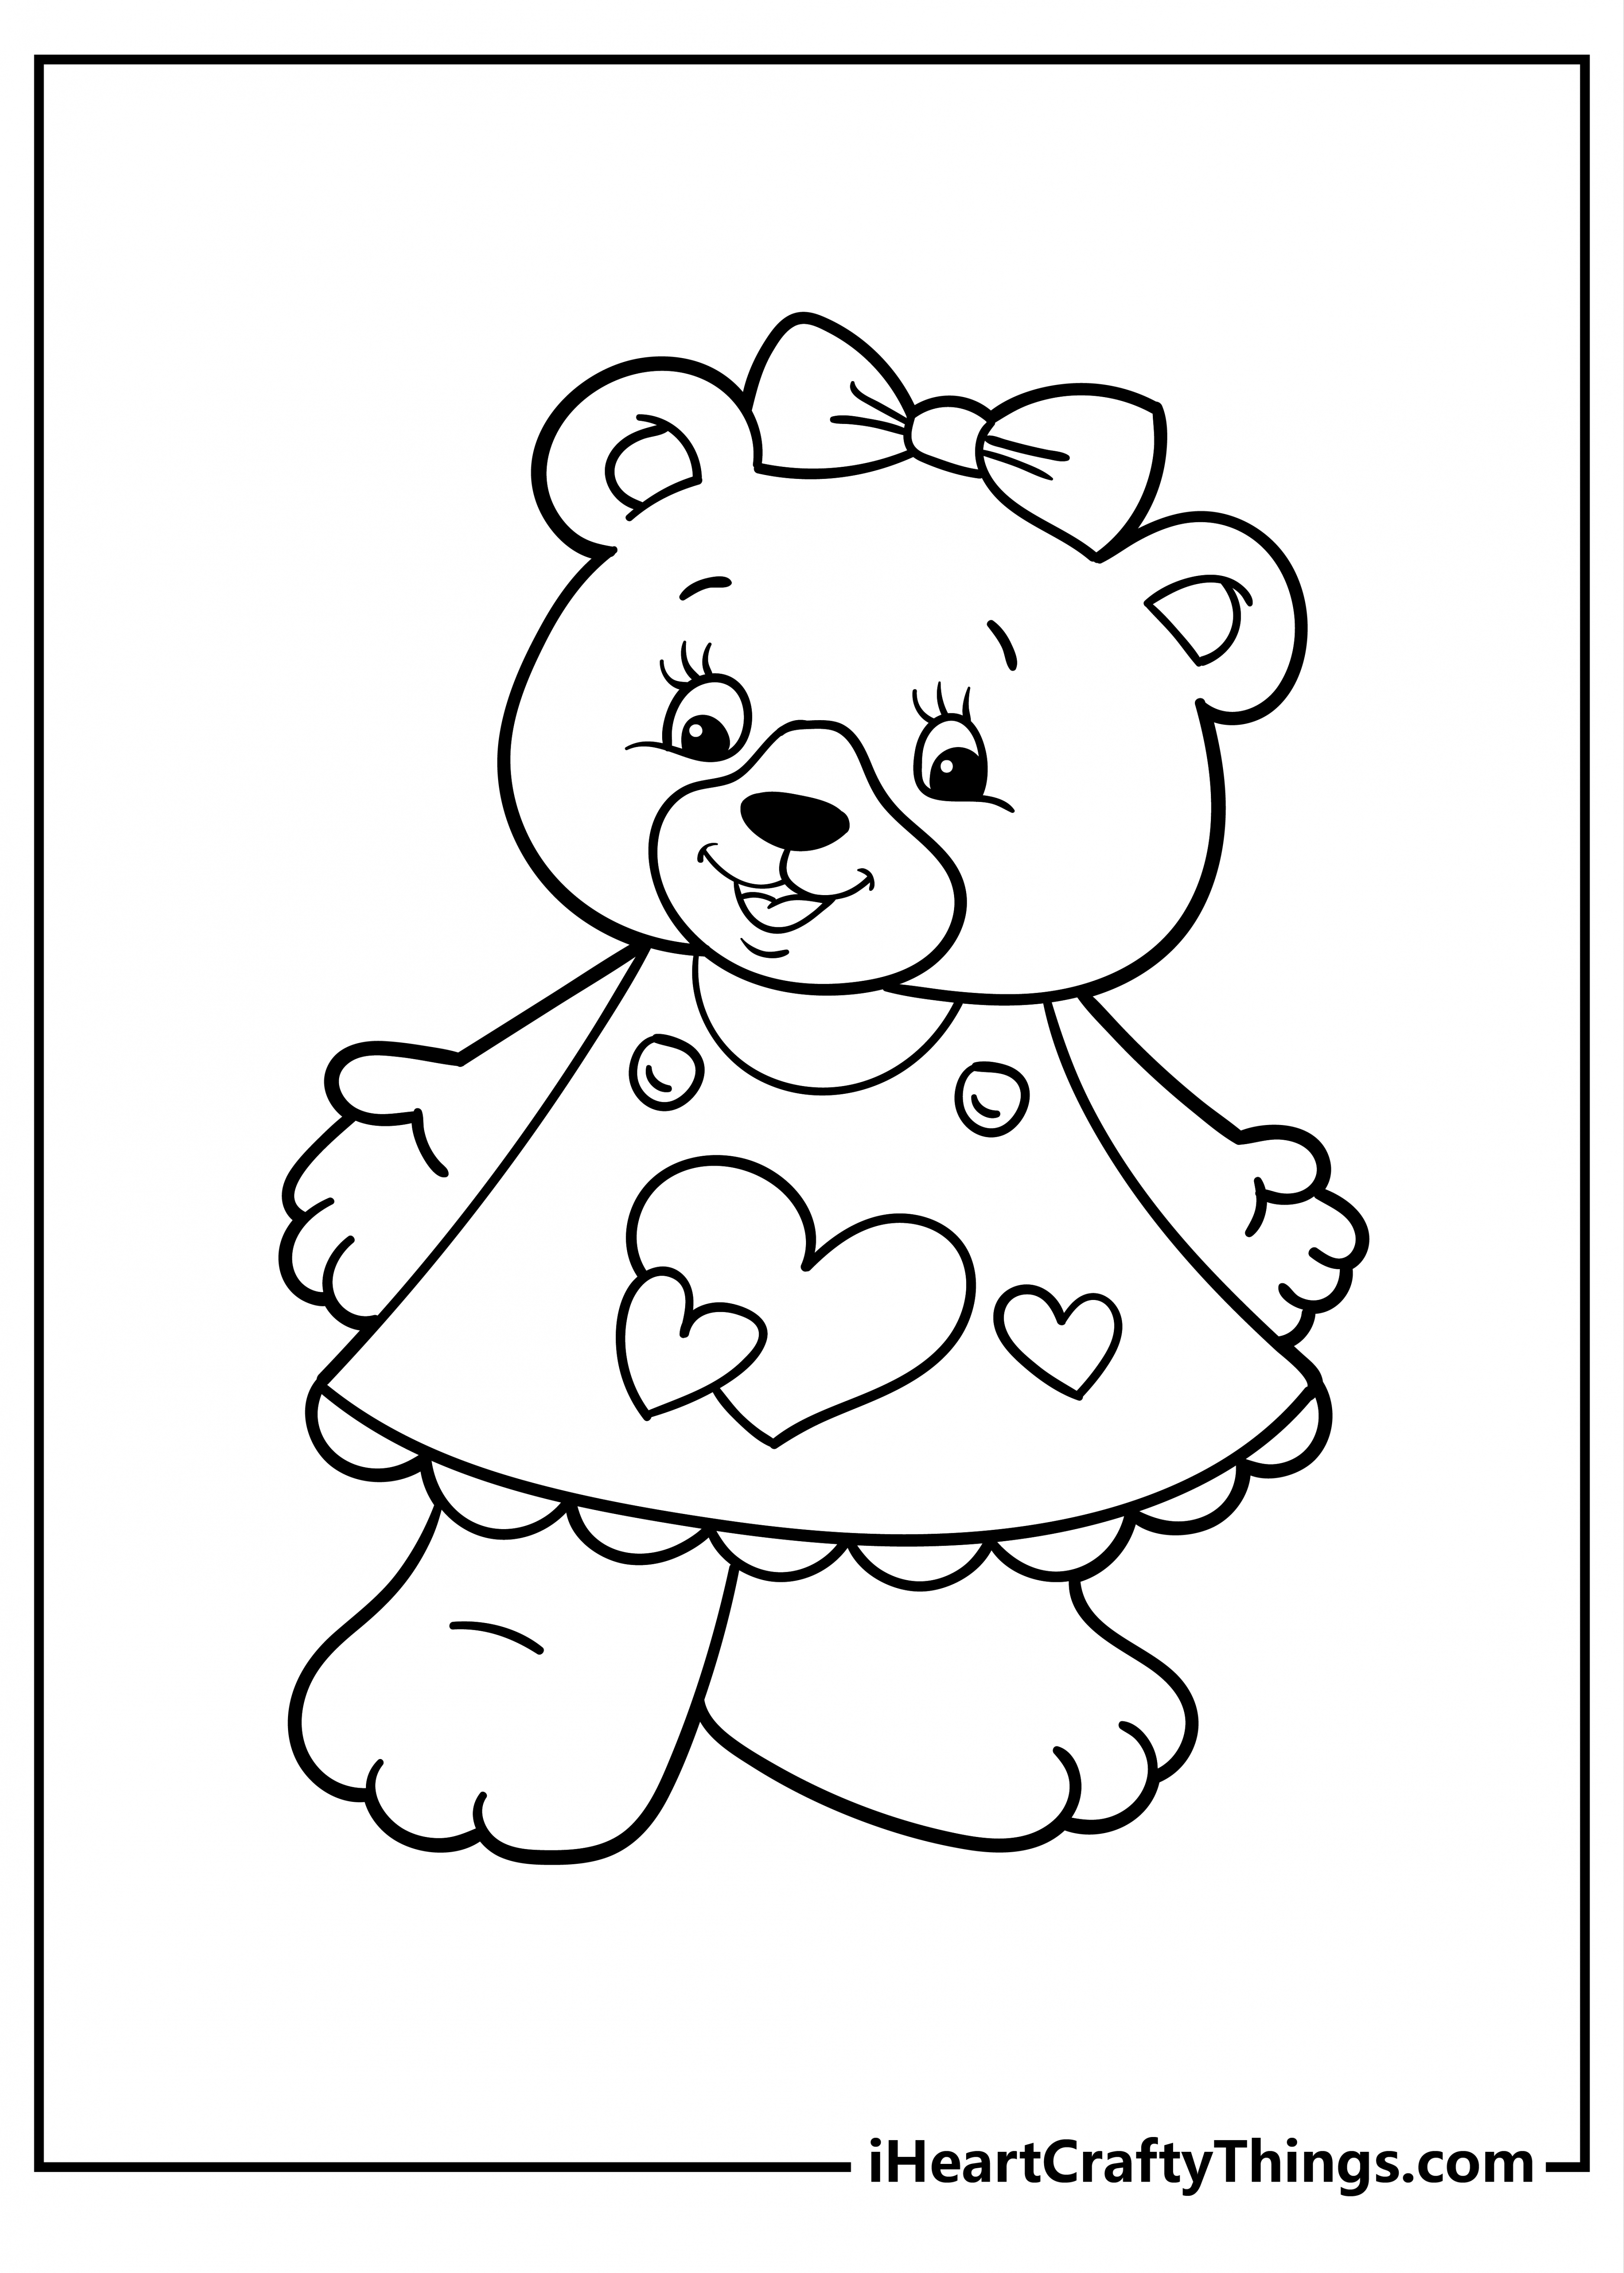 Free Printable Coloring Pages For Girls - Printable - Printable Cute Coloring Pages For Girls (Updated )